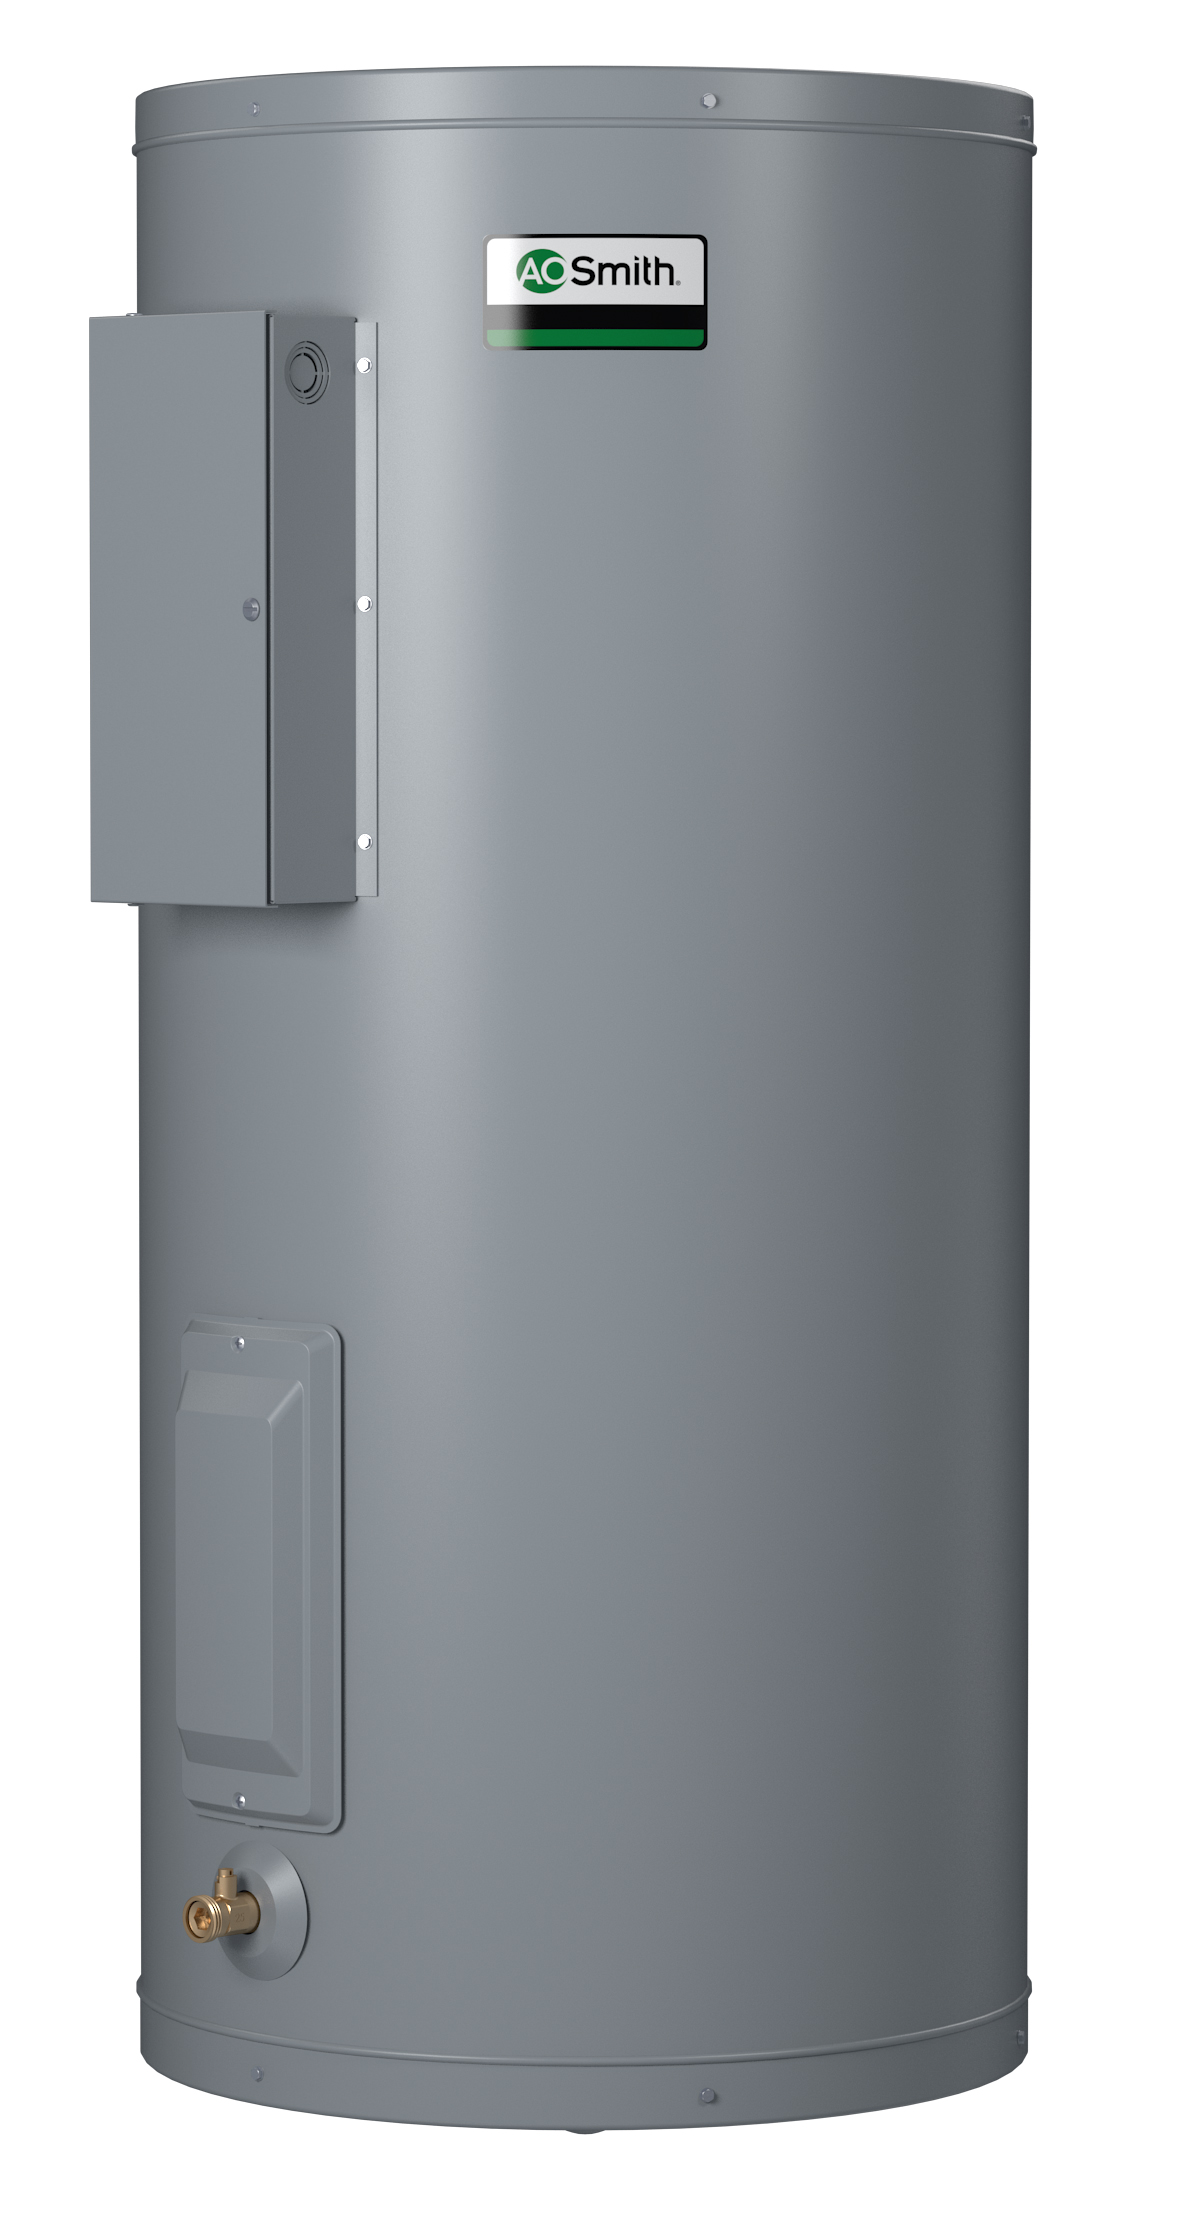 AO SMITH DEL-50D: 51 GALLONS, 6.0KW, 208 VOLT, 1 PHASE, (2-6000 WATT ELEMENTS, NON-SIMULTANEOUS WIRING), DURA-POWER, LIGHT DUTY COMMERCIAL ELECTRIC WATER HEATER